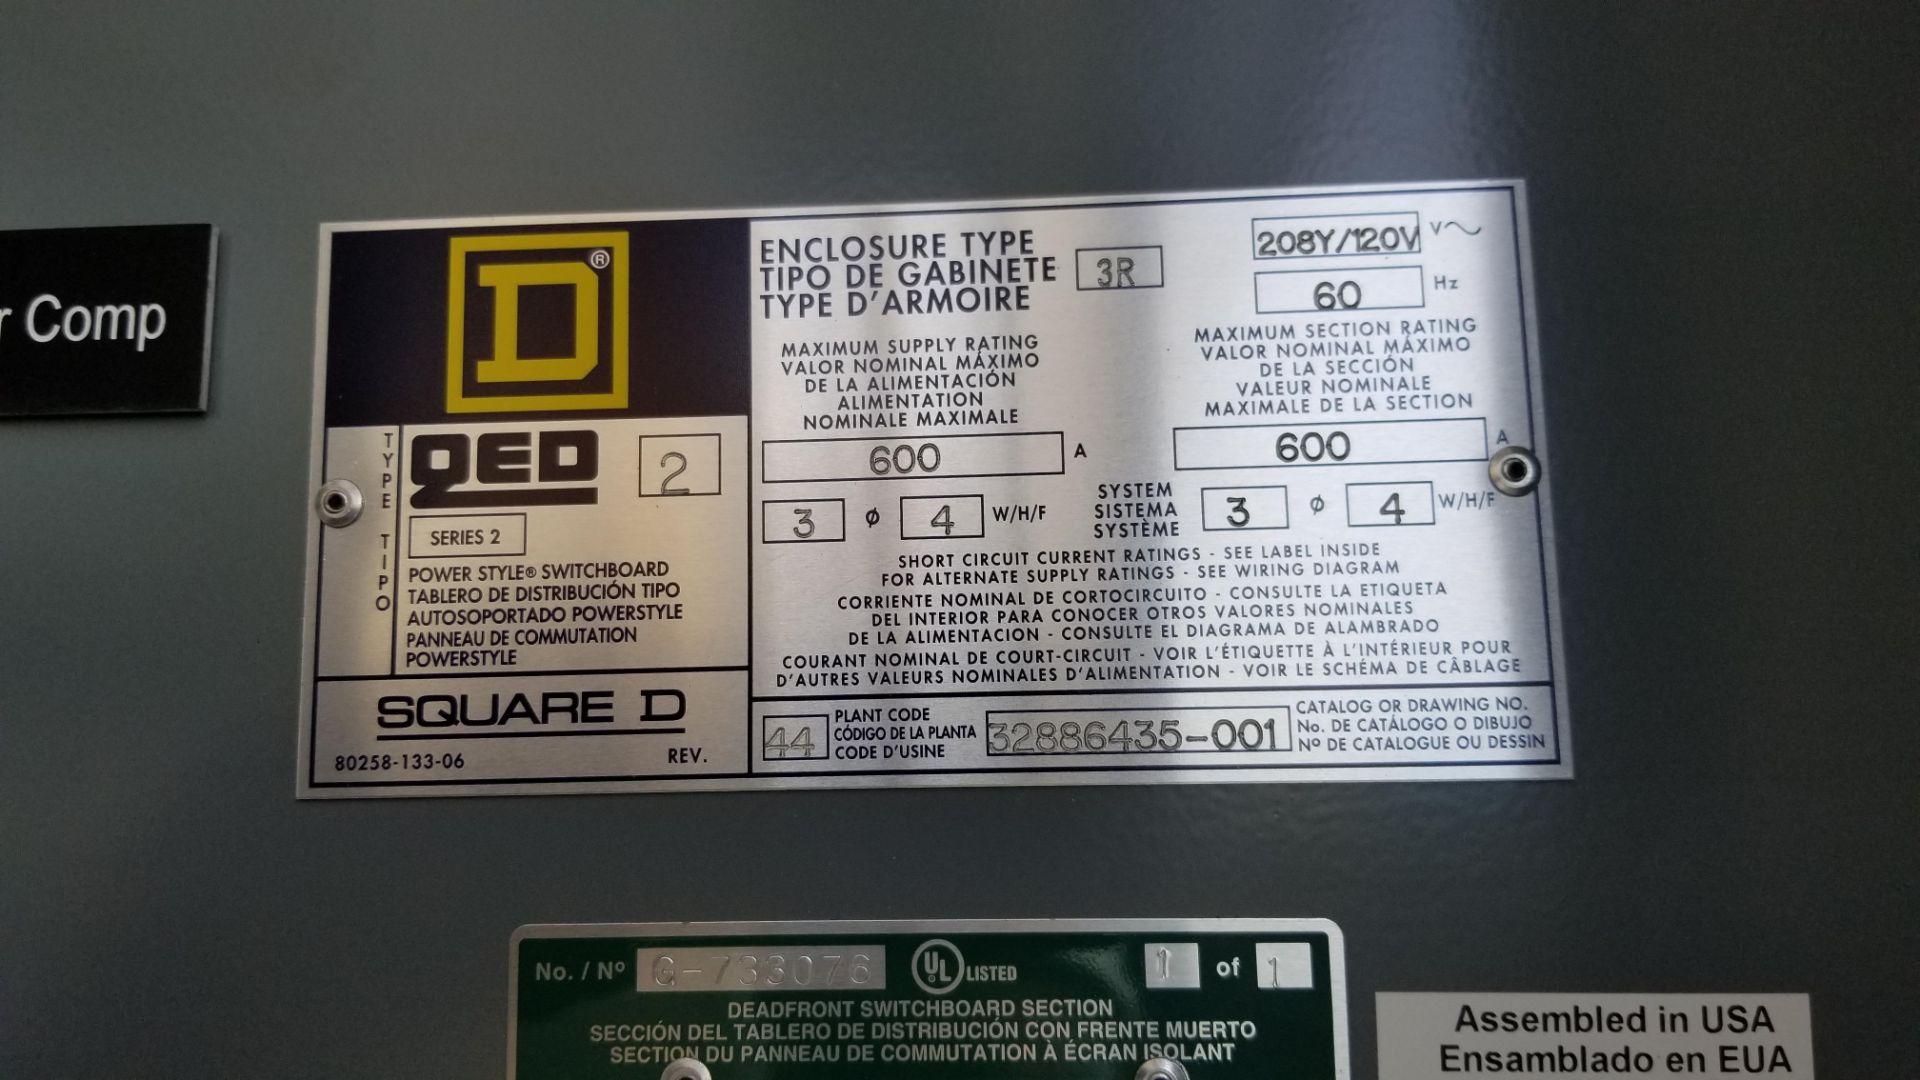 (2) Plant Electrical Panels Including (1) Square D 600 Amp, cat no. 32886435-001 - 208Y/120V with ( - Image 3 of 6